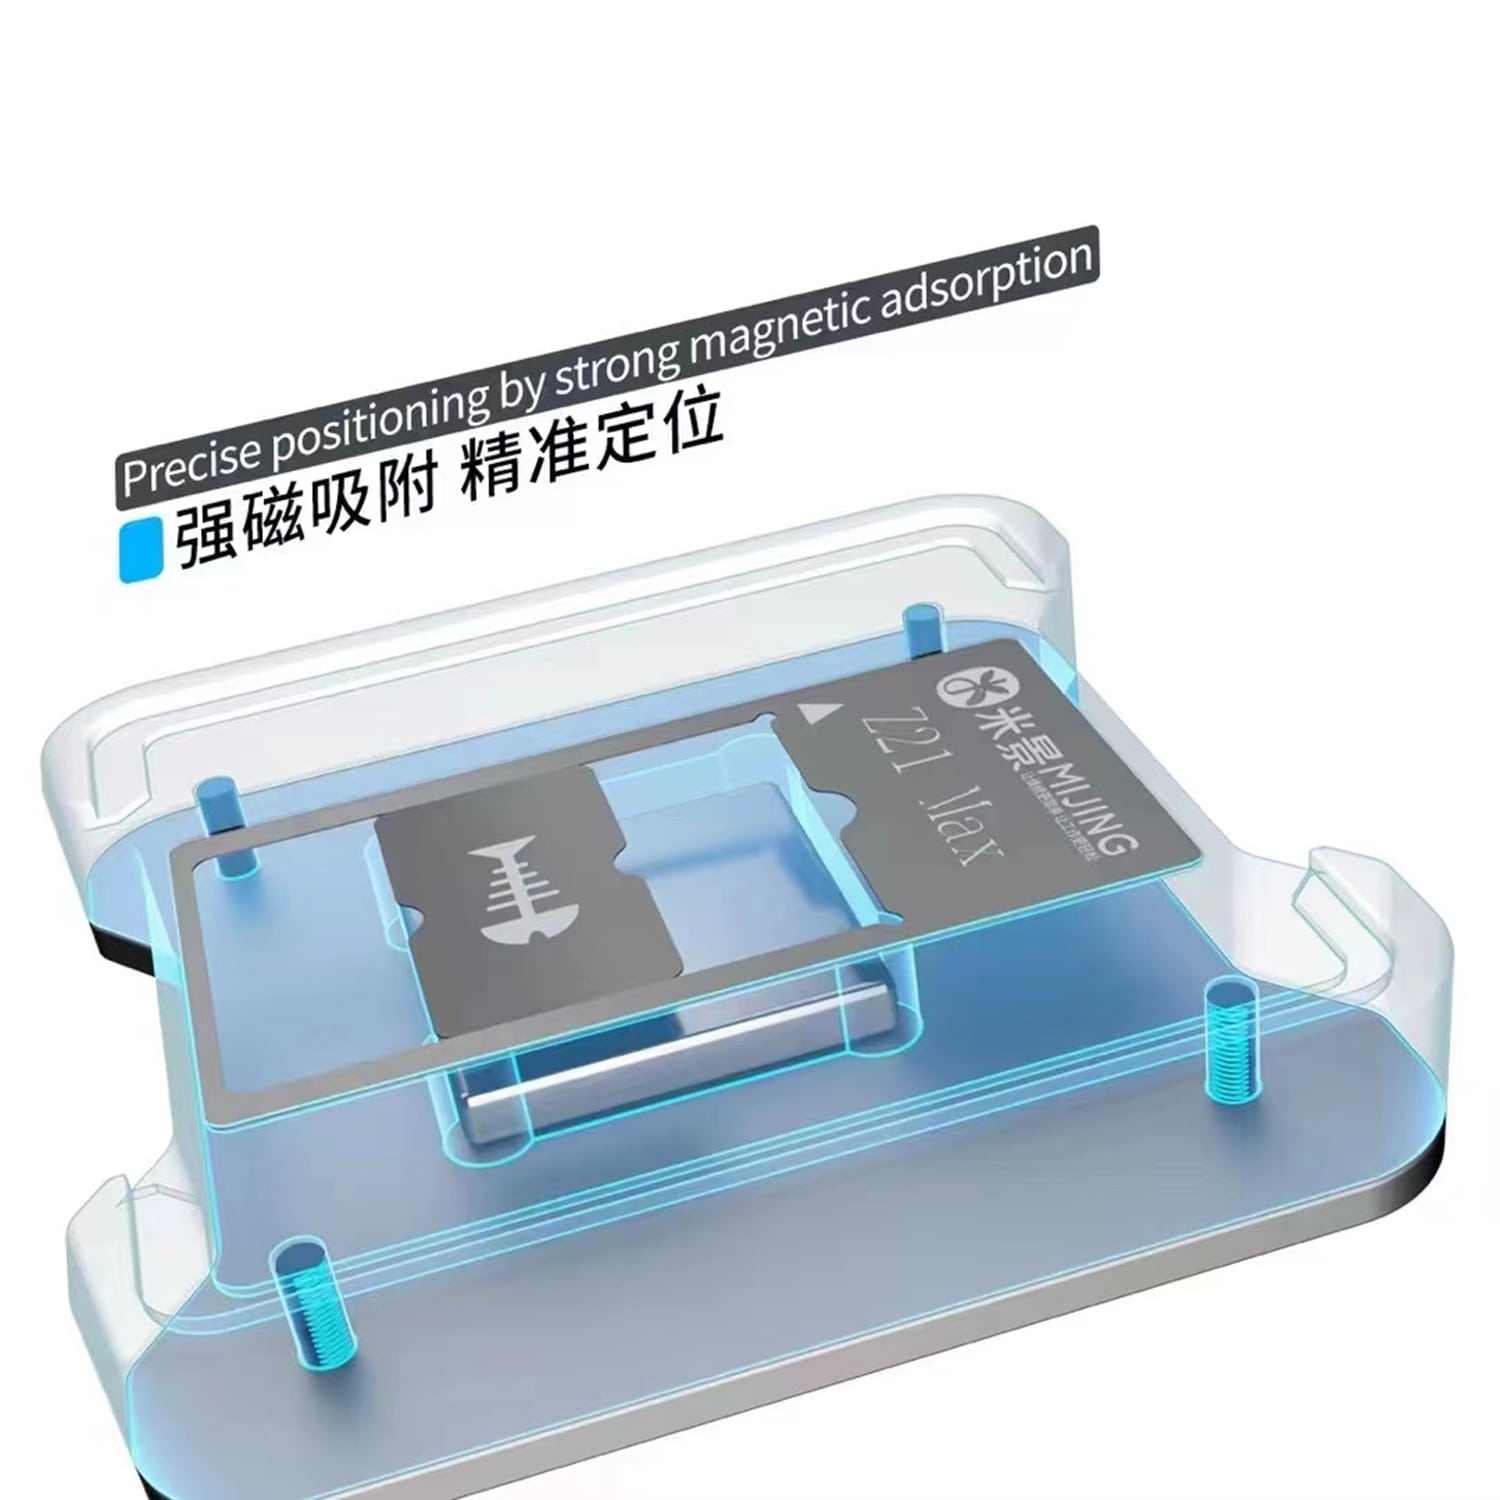 MIJING Z21 MAX CPU IC CHIP REBALLING STENCIL STATION FOR IPHONE ANDROID